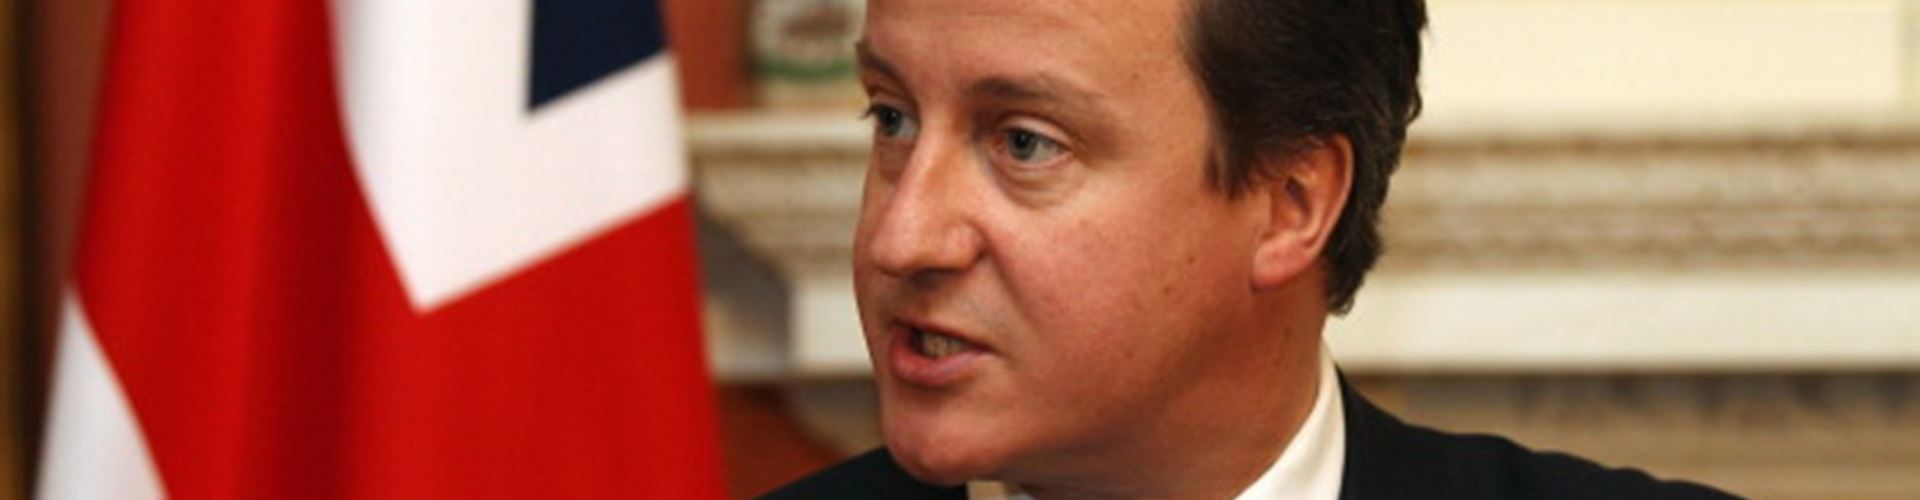 PM Cameron backs fintech manifesto that promises 100,000 jobs by 2020